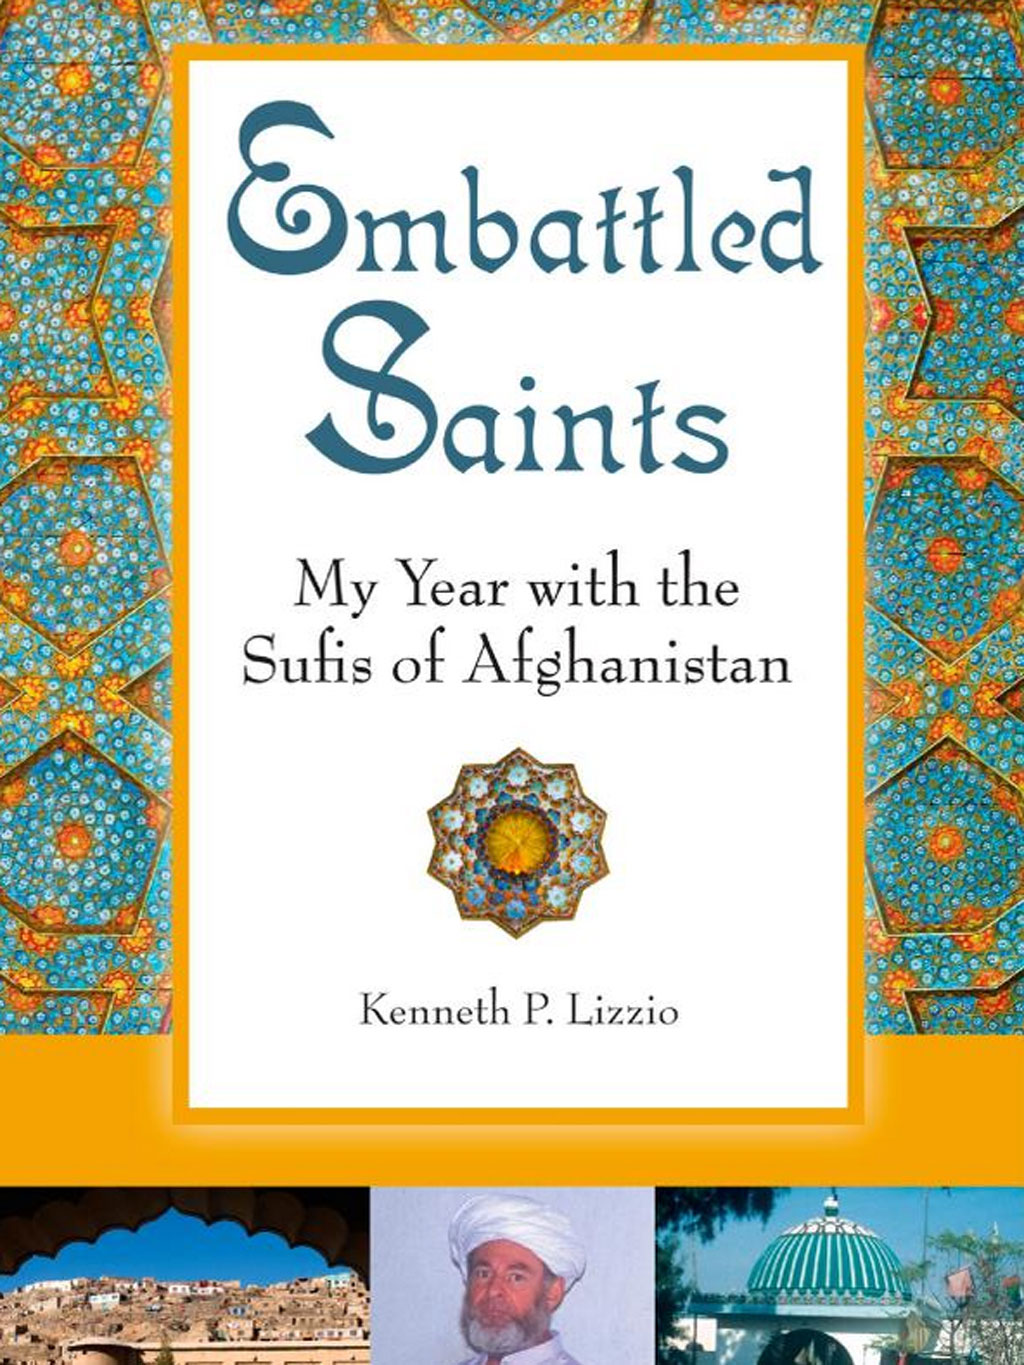 Buchcover von Kenneth P. Lazzios "Embattled Saints - My Year With The Sufis Of Afghanistan" Foto: Quest Books